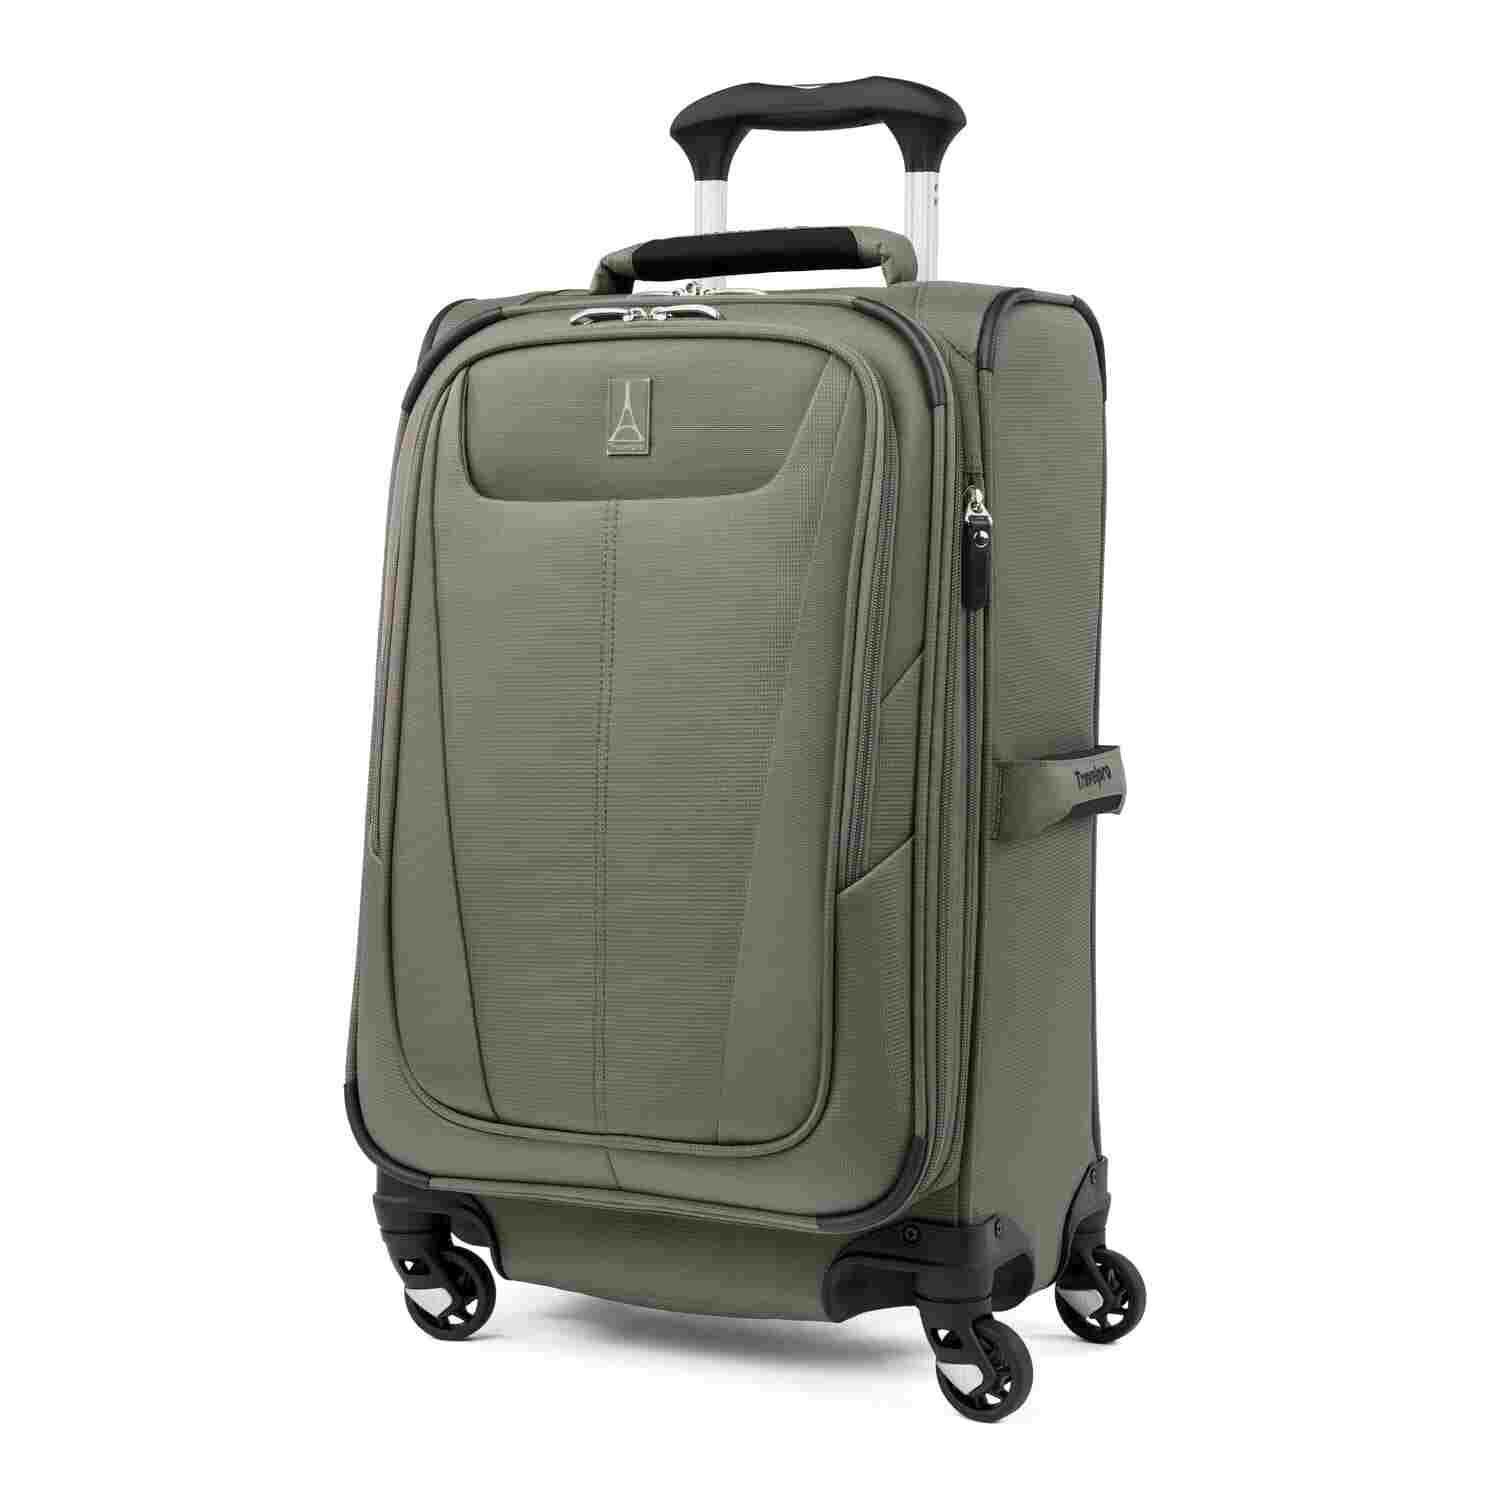 travelpro maxlite 5 carry on suitcase green suitcase black wheels black and silver handle green travelpro logo